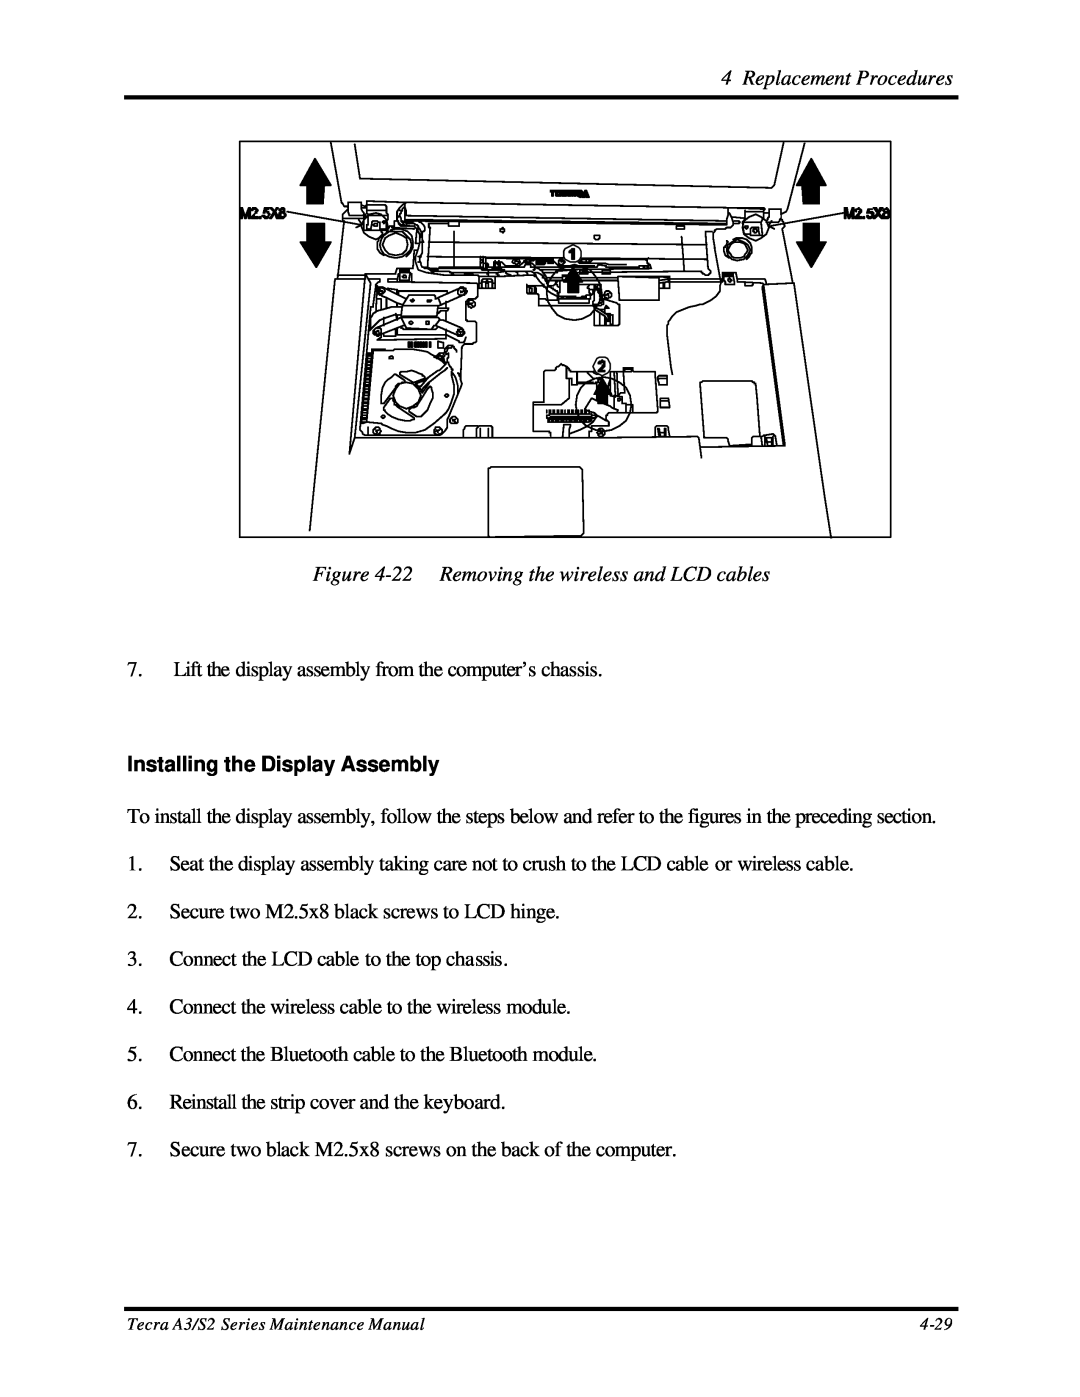 Toshiba S2 manual 22 Removing the wireless and LCD cables, Installing the Display Assembly, Replacement Procedures 